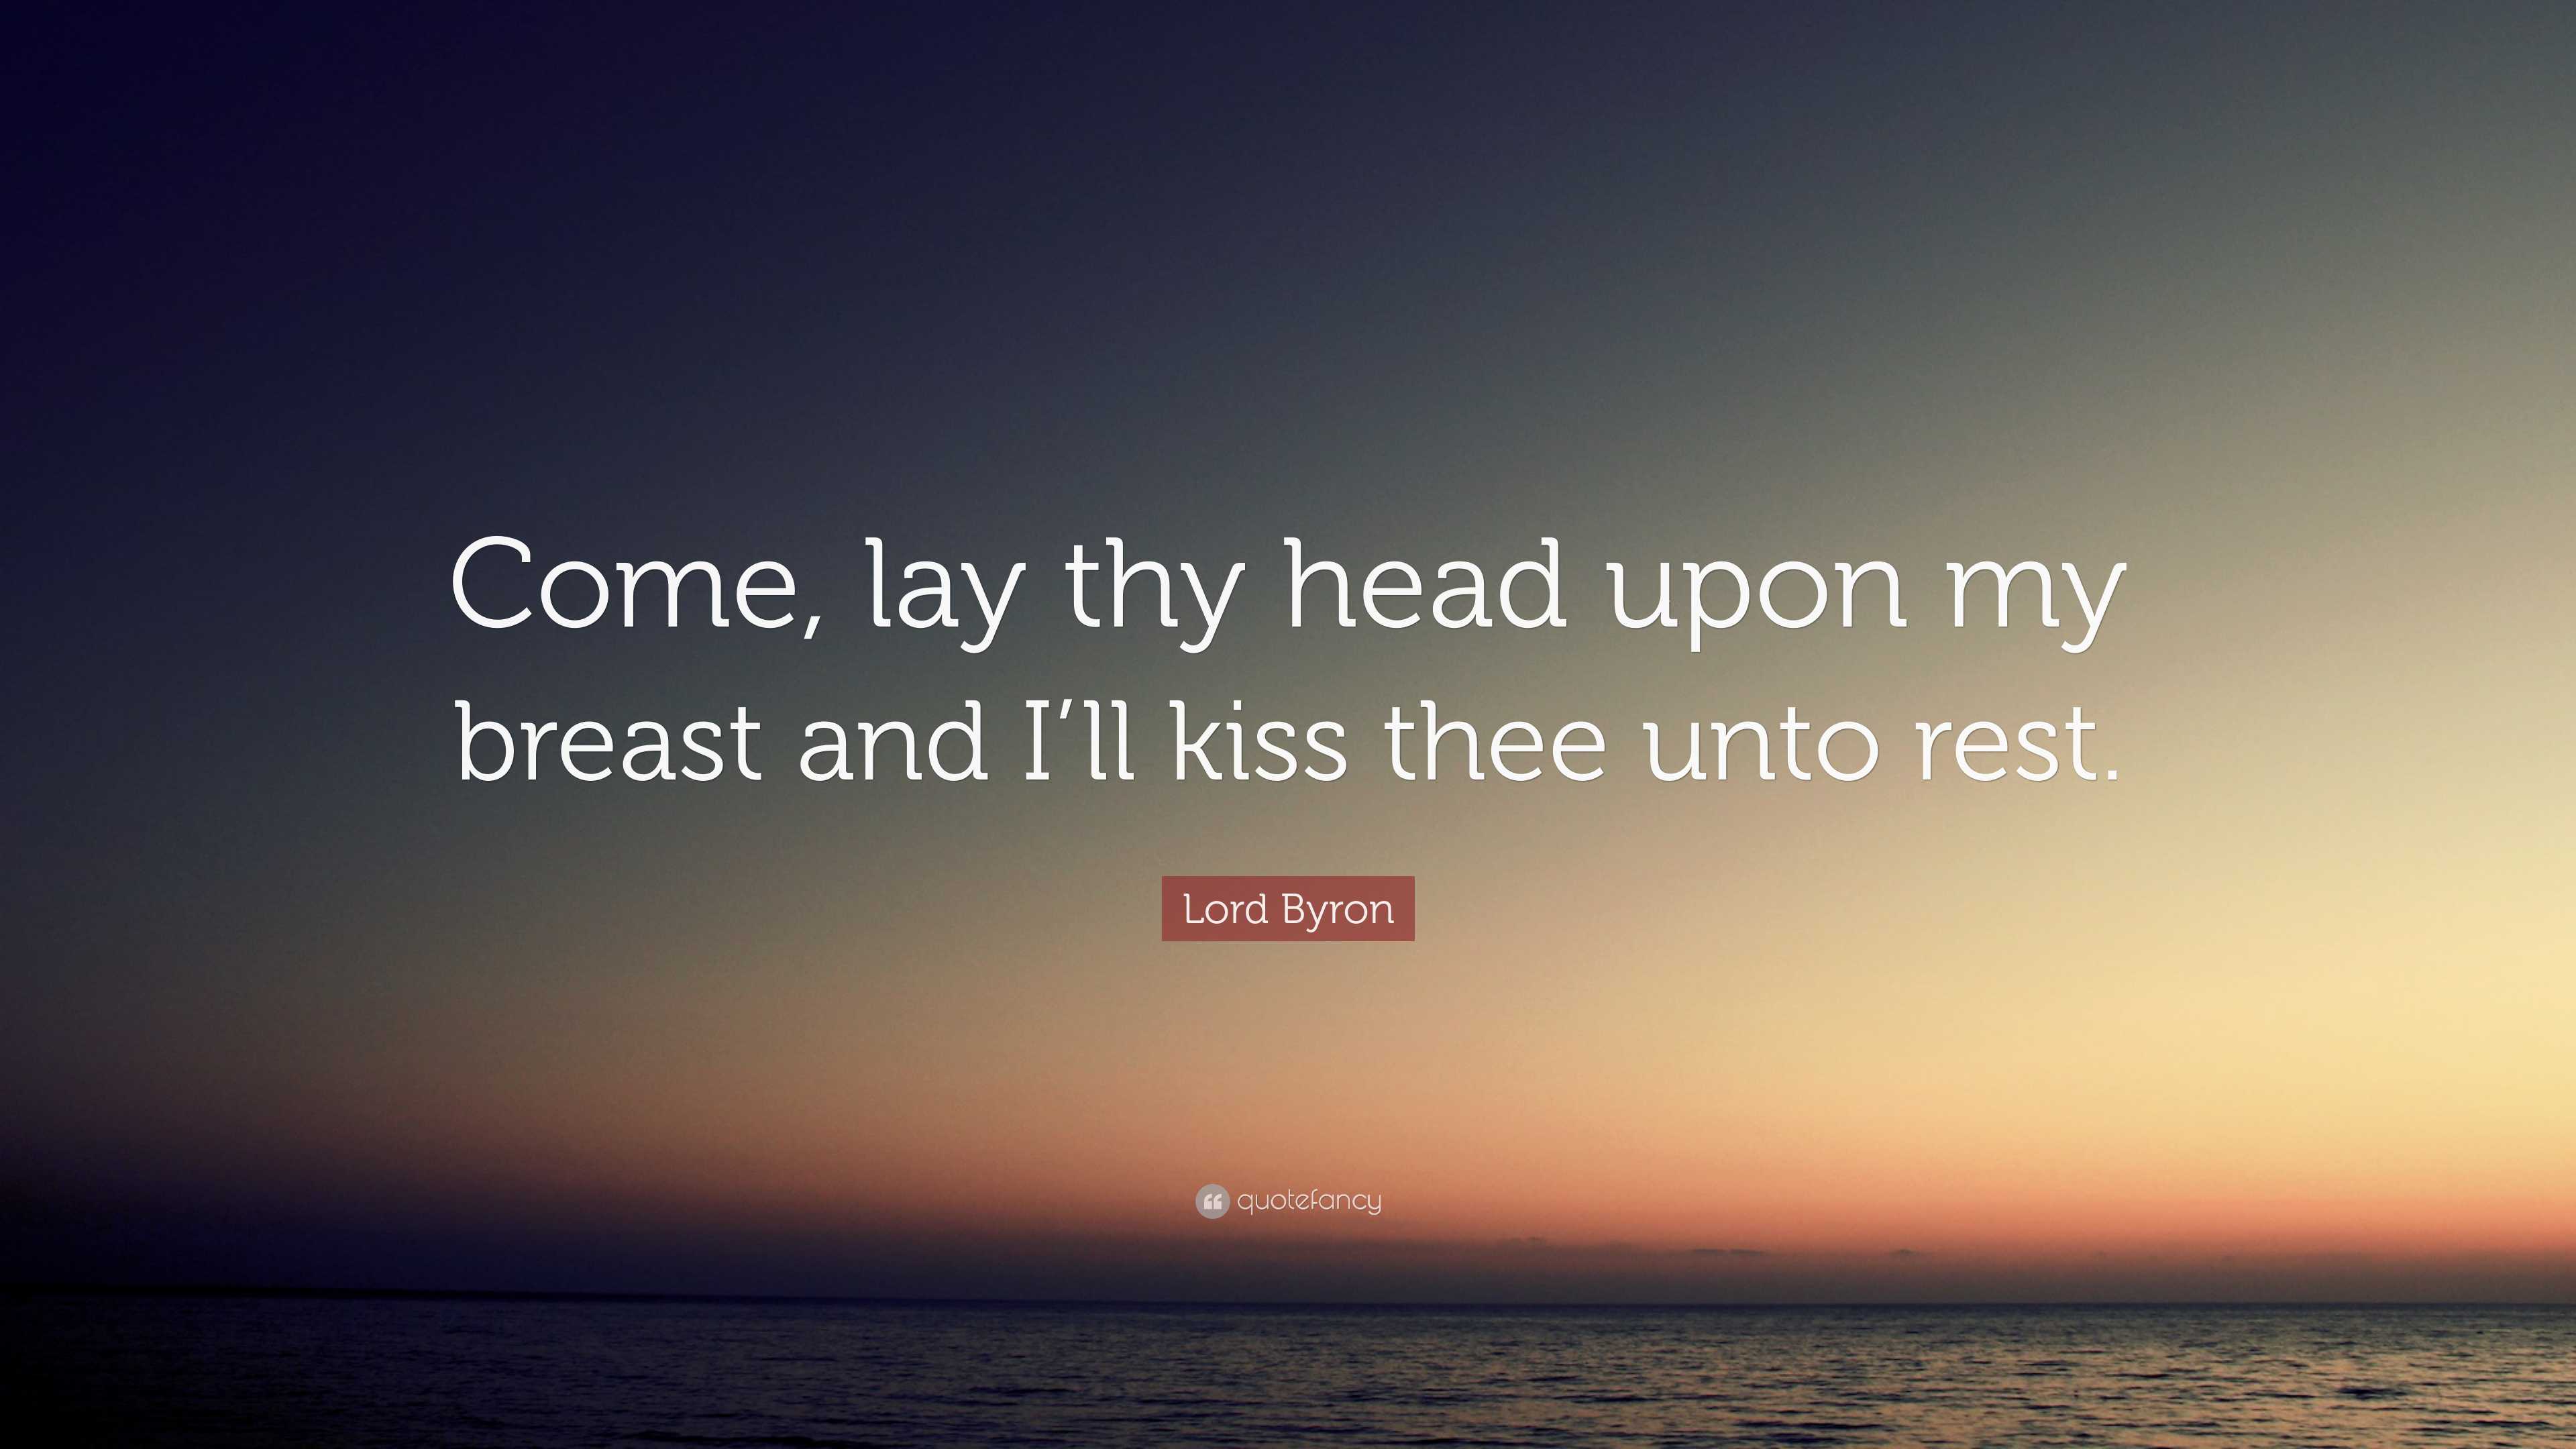 Lord Byron Quote: “Come, lay thy head upon my breast and I'll kiss